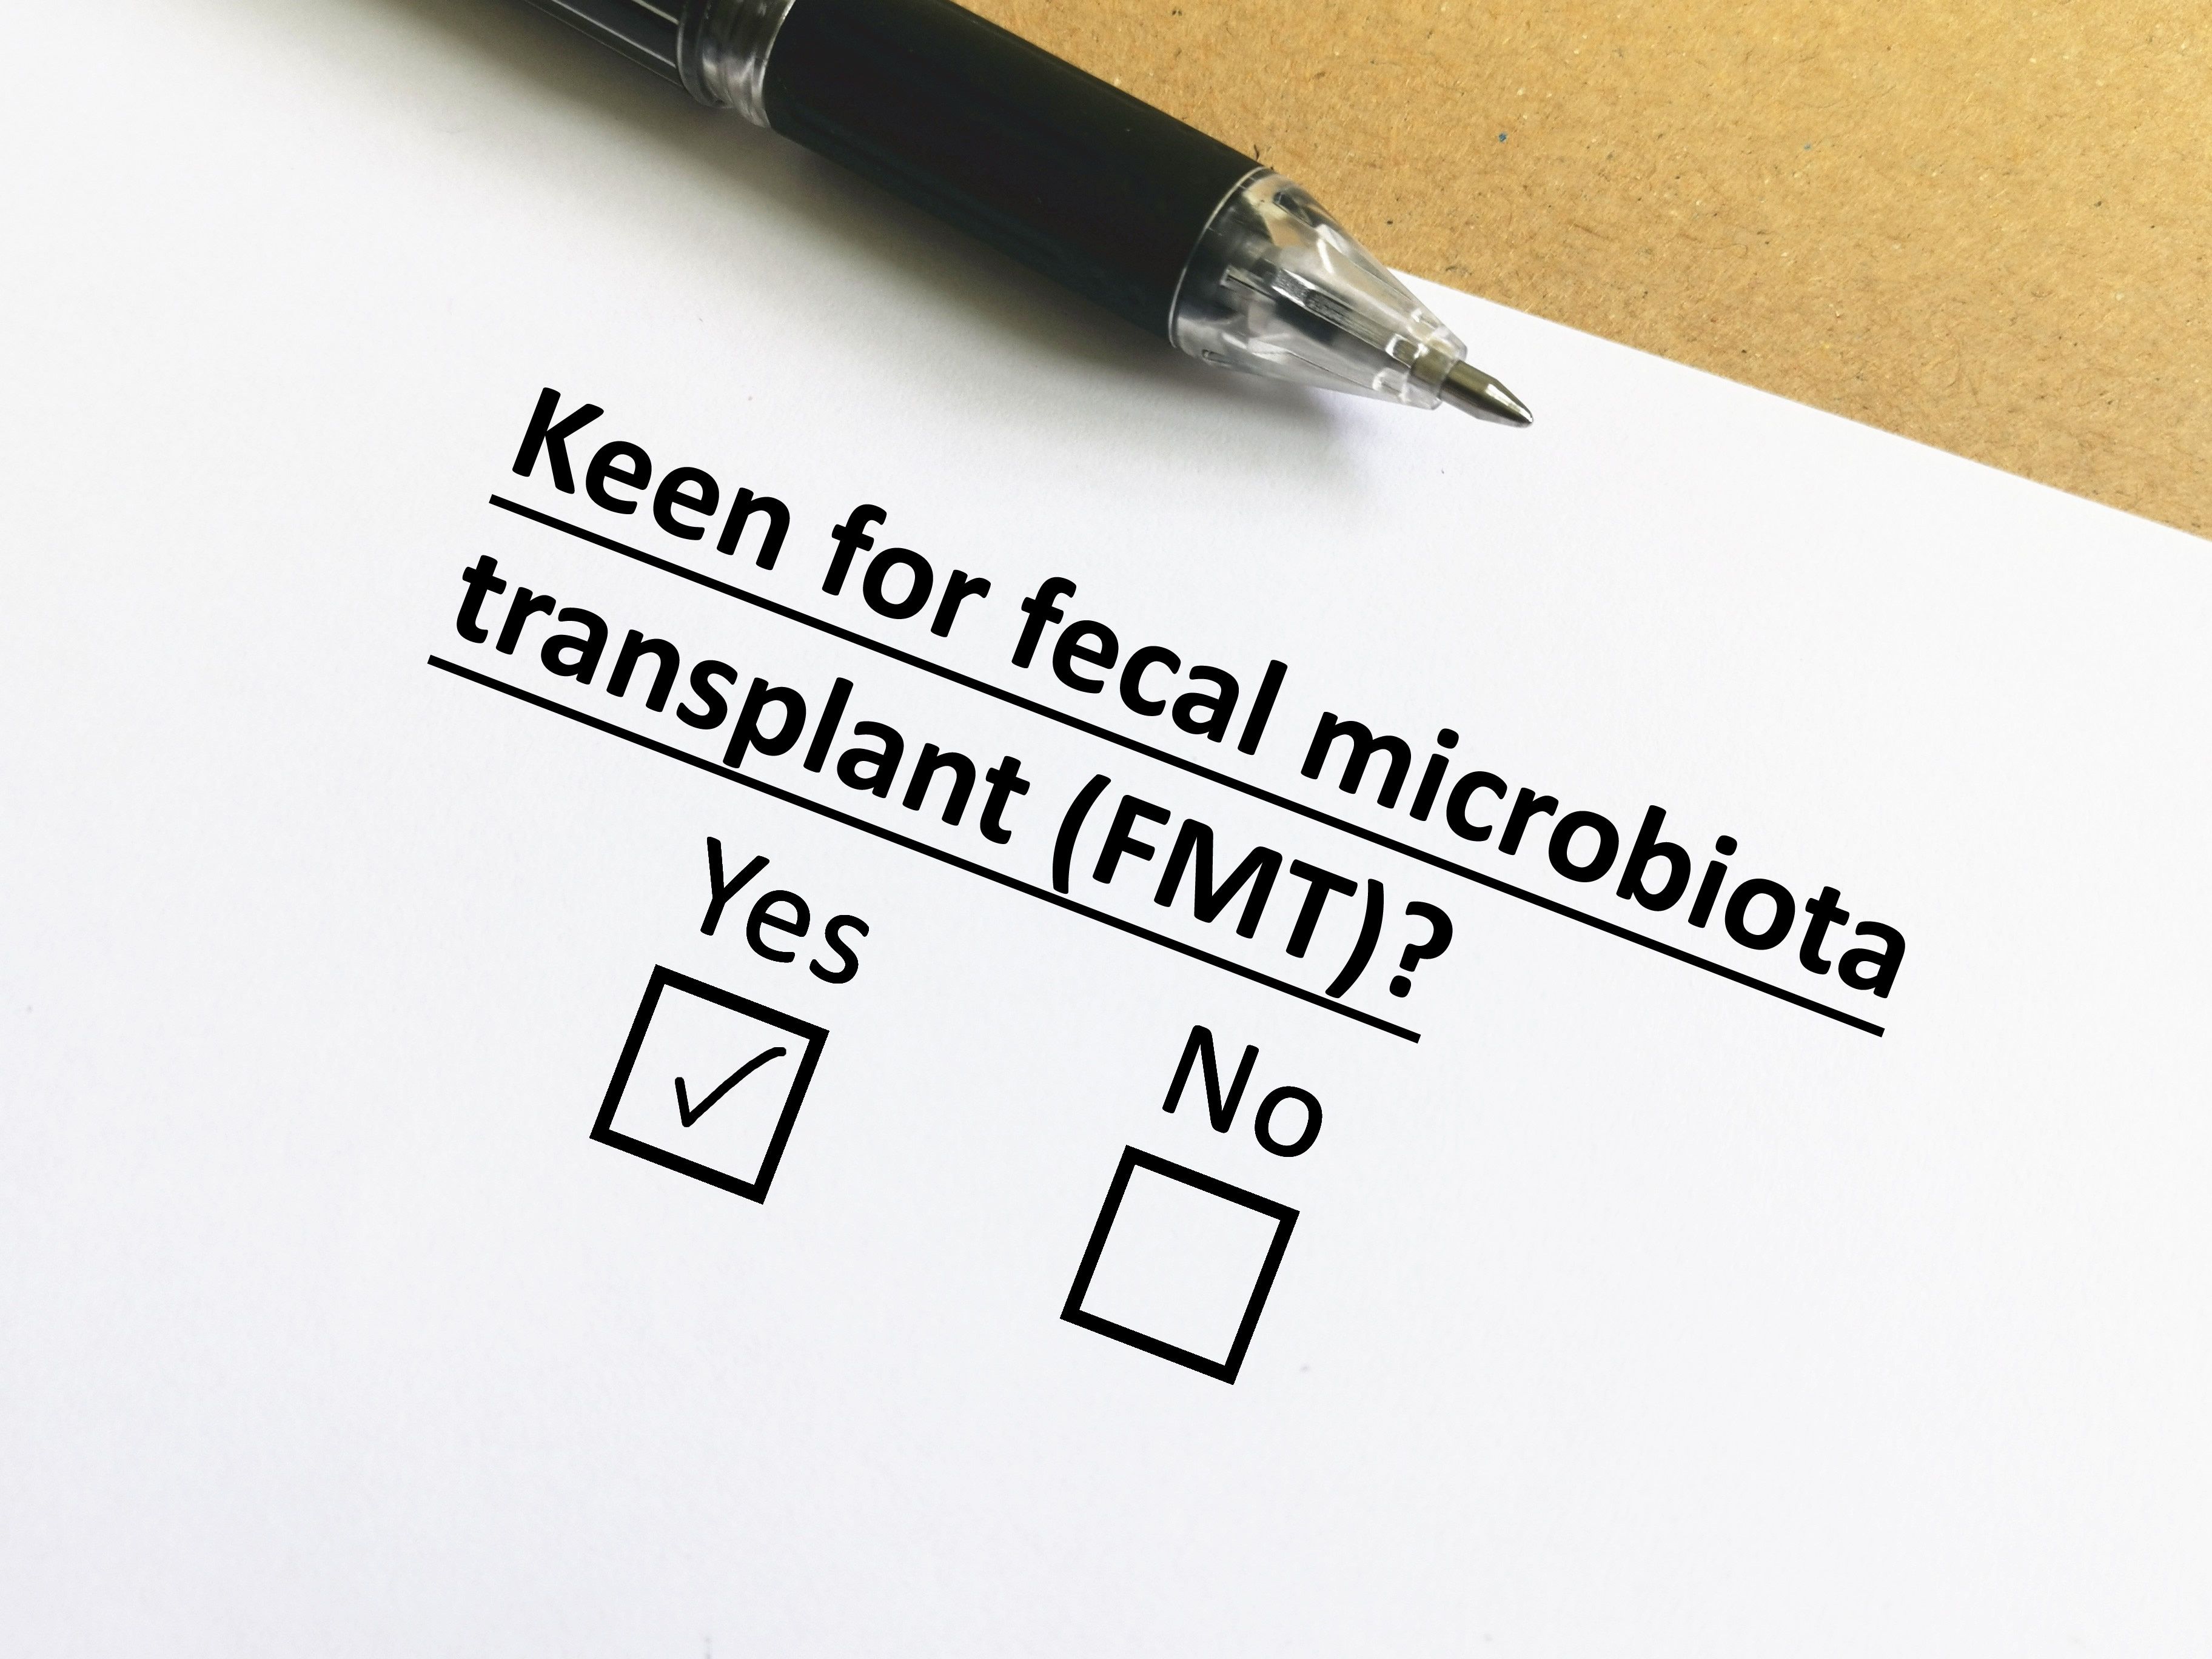  Fecal microbiota transplantation (FMT) is known to be an effective treatment for recurrent Clostridioides difficile infection. New research from the UVA School of Medicine reveals why.